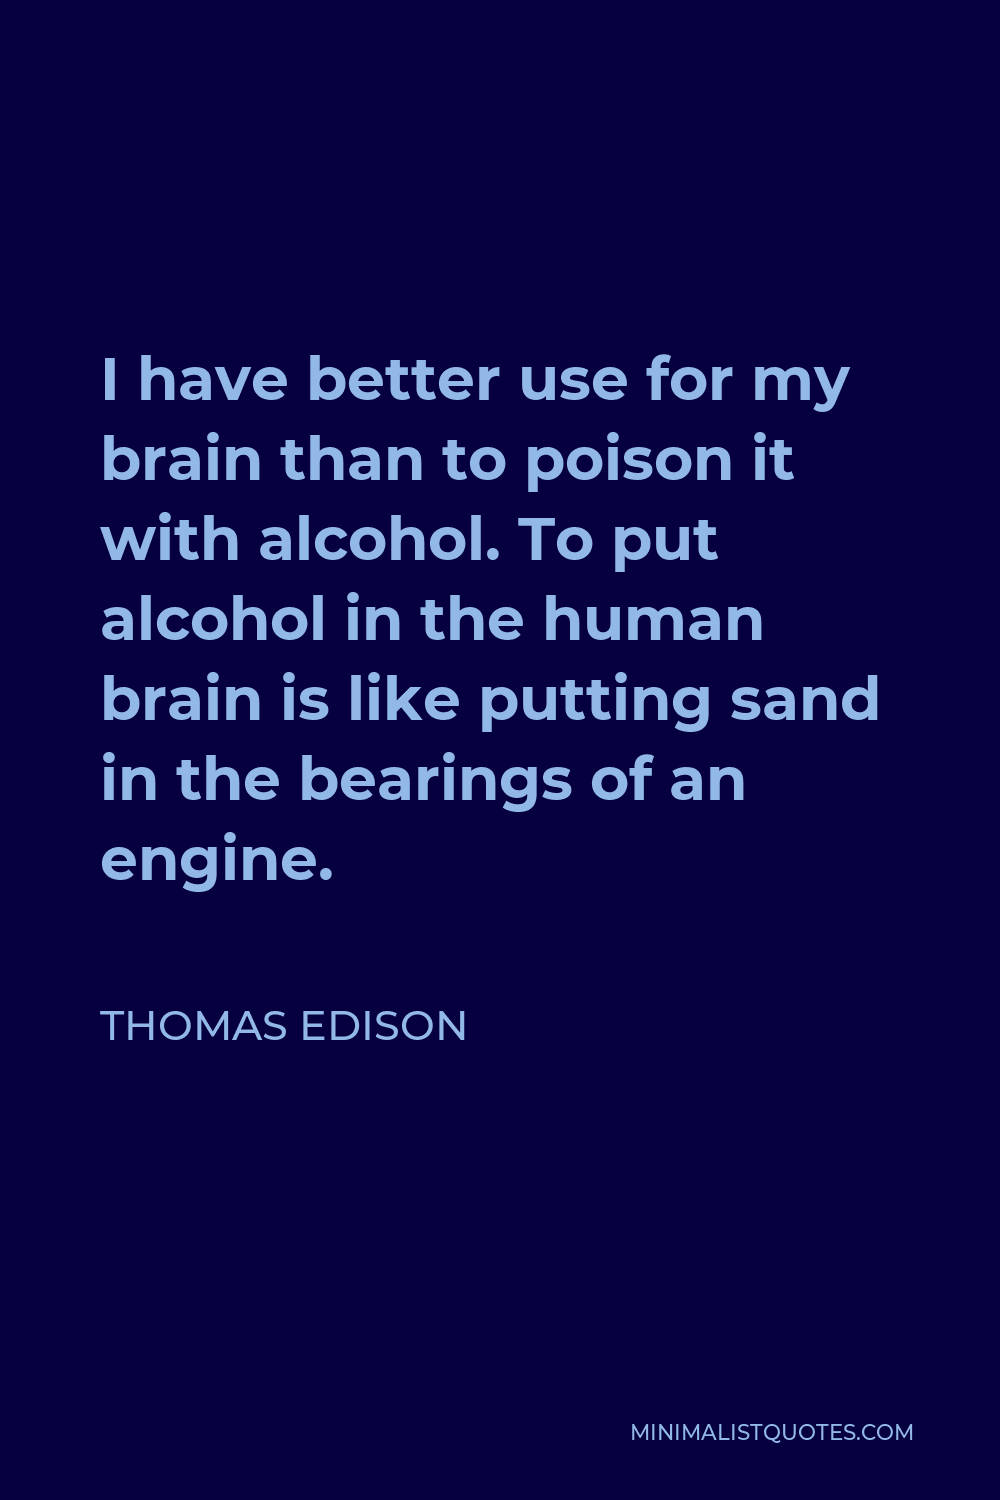 Thomas Edison Quote - I have better use for my brain than to poison it with alcohol. To put alcohol in the human brain is like putting sand in the bearings of an engine.